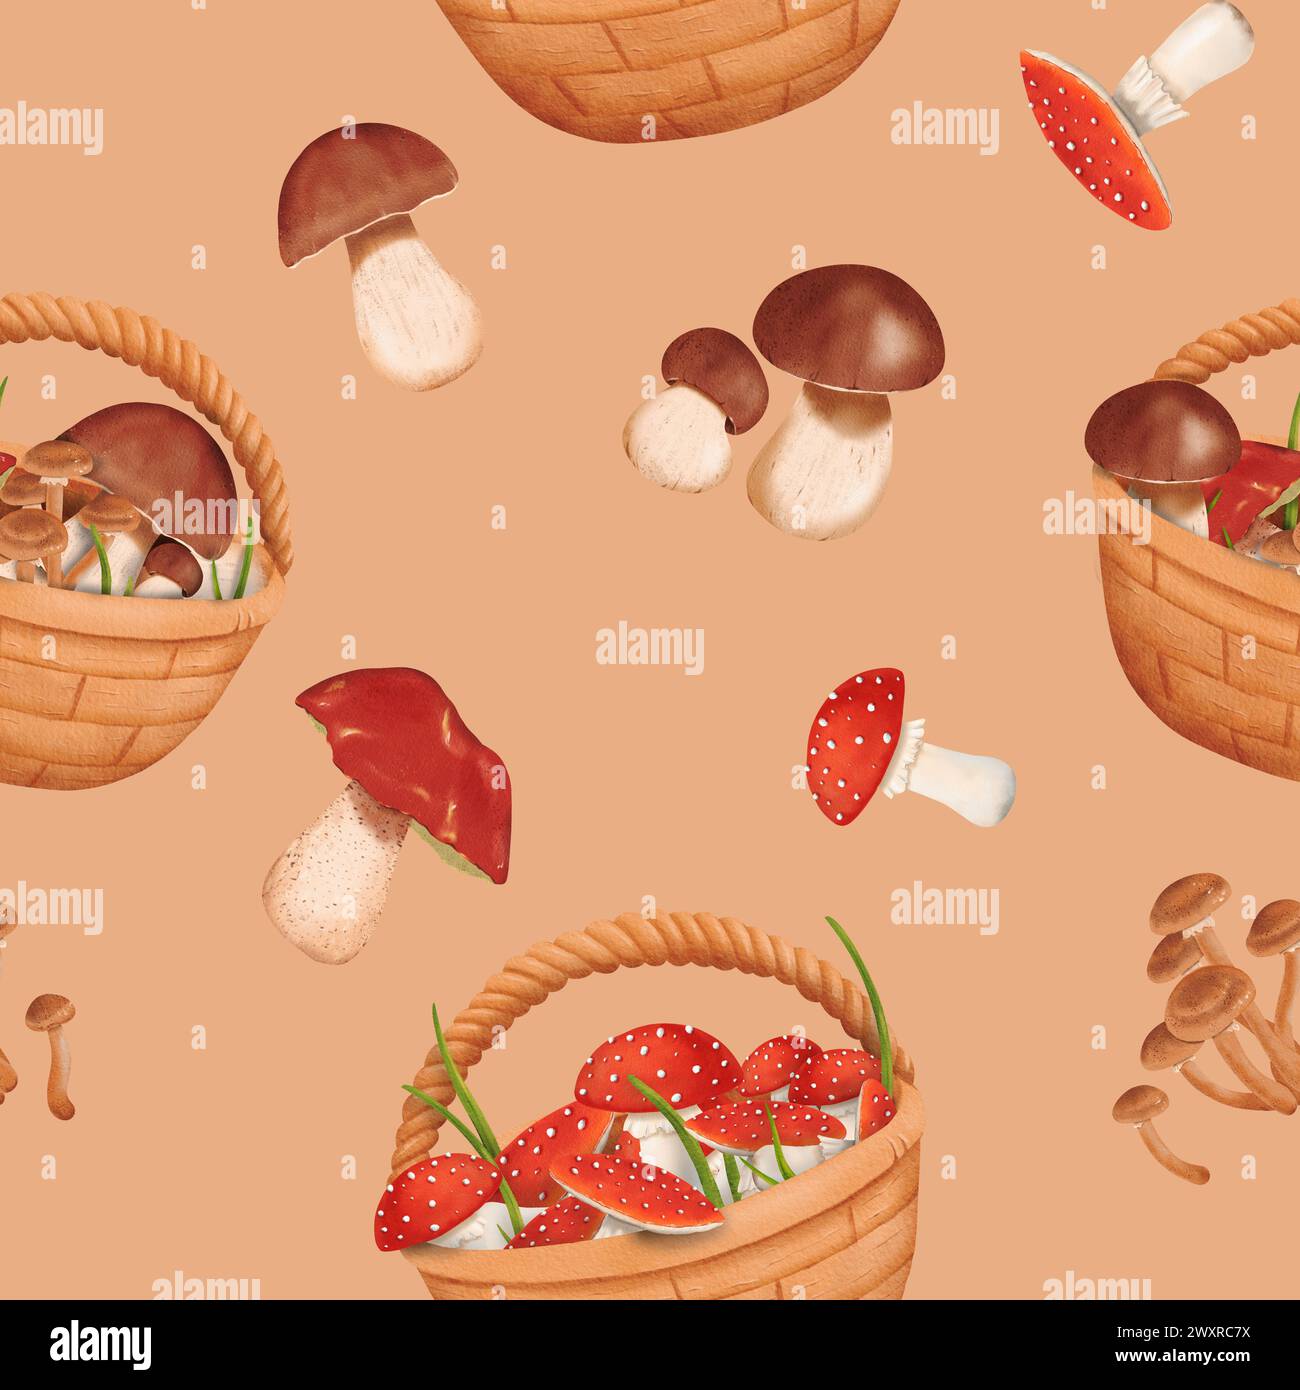 Woodland seamless pattern. harvest of various mushrooms. Baskets filled with forest treasures. Edible penny bun and porcini mushrooms. Dangerous and Stock Photo